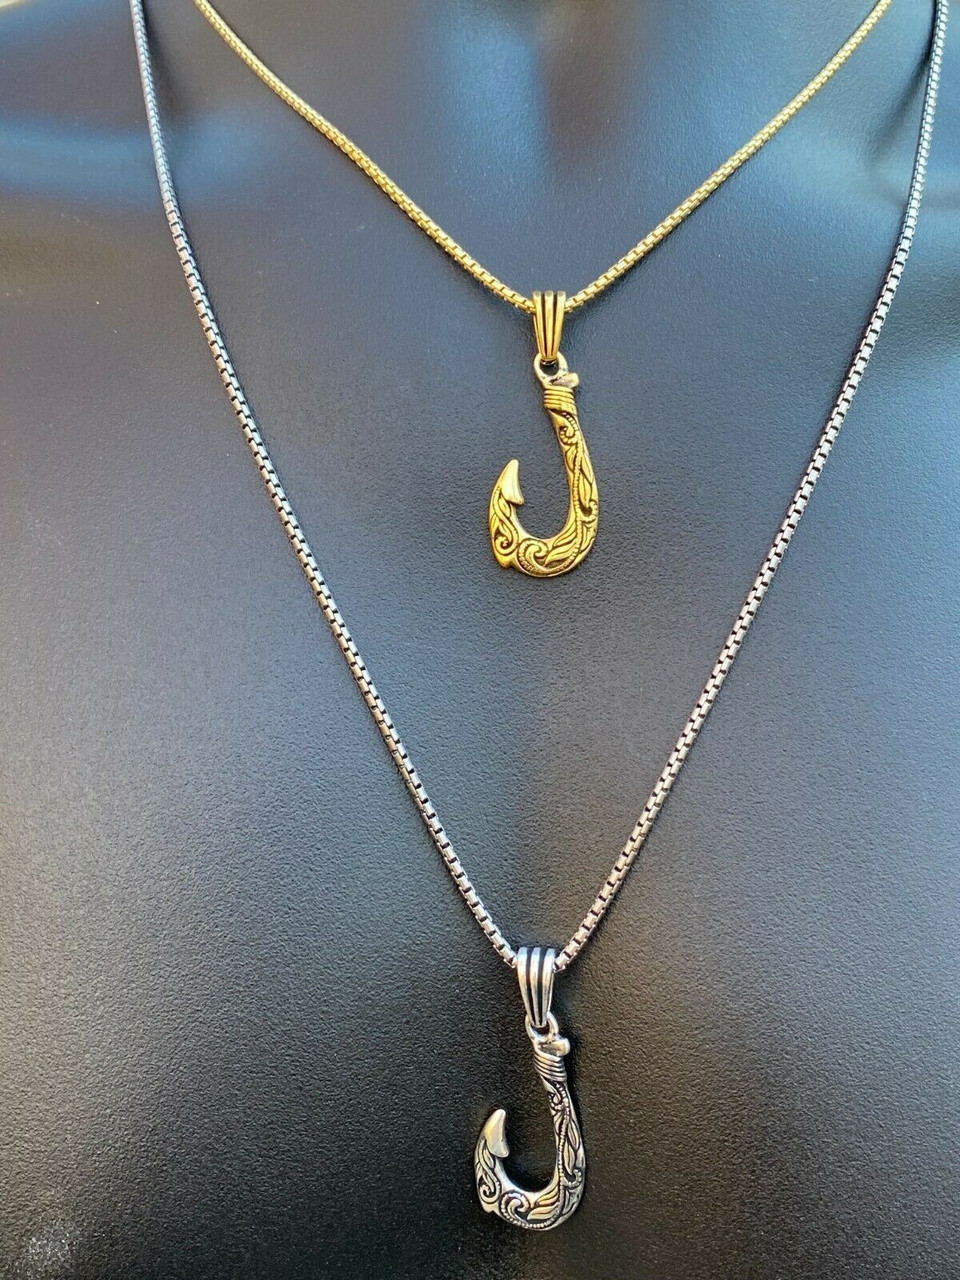 https://cdn11.bigcommerce.com/s-s8inshvd4z/images/stencil/original/products/4337/65818/real-solid-925-sterling-silver-hawaiian-fishing-hook-large-mens-necklace-gold__42414.1664389628.jpg?c=2